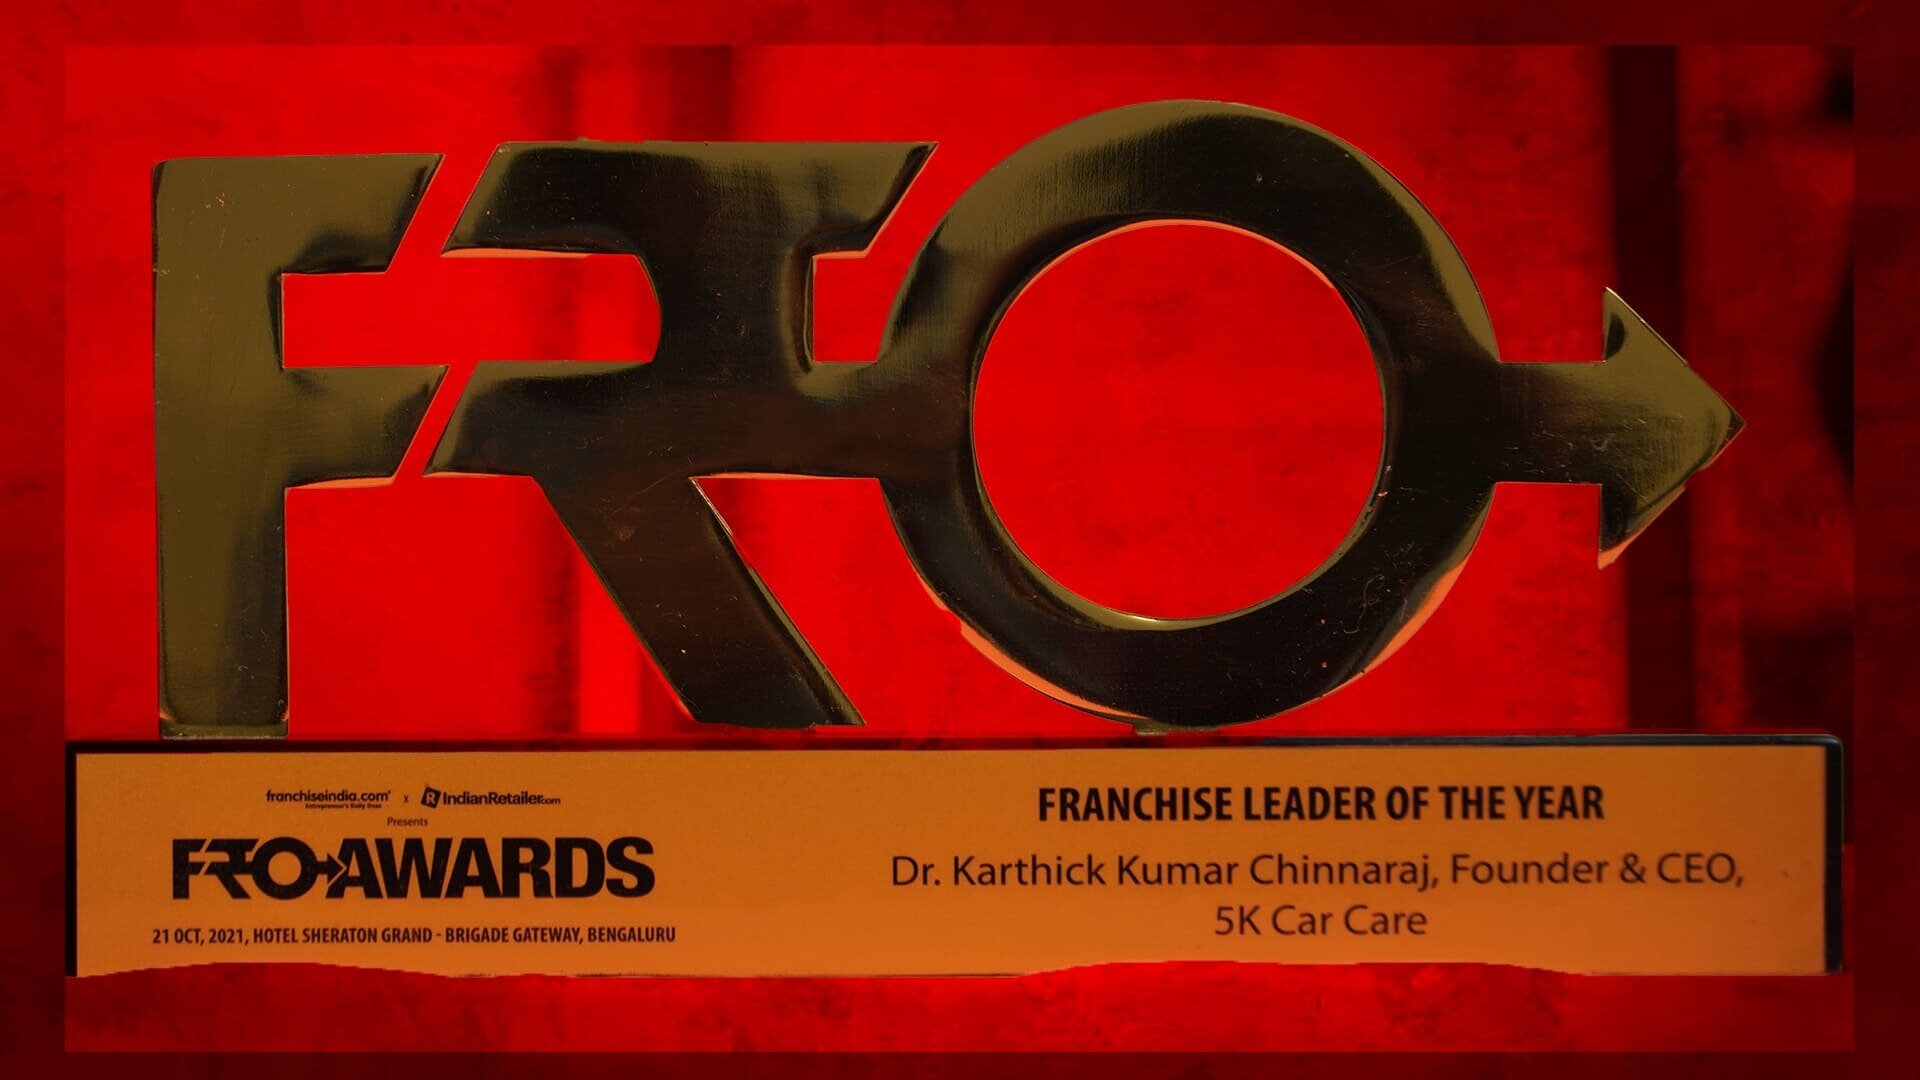 Franchise Leader of The Year